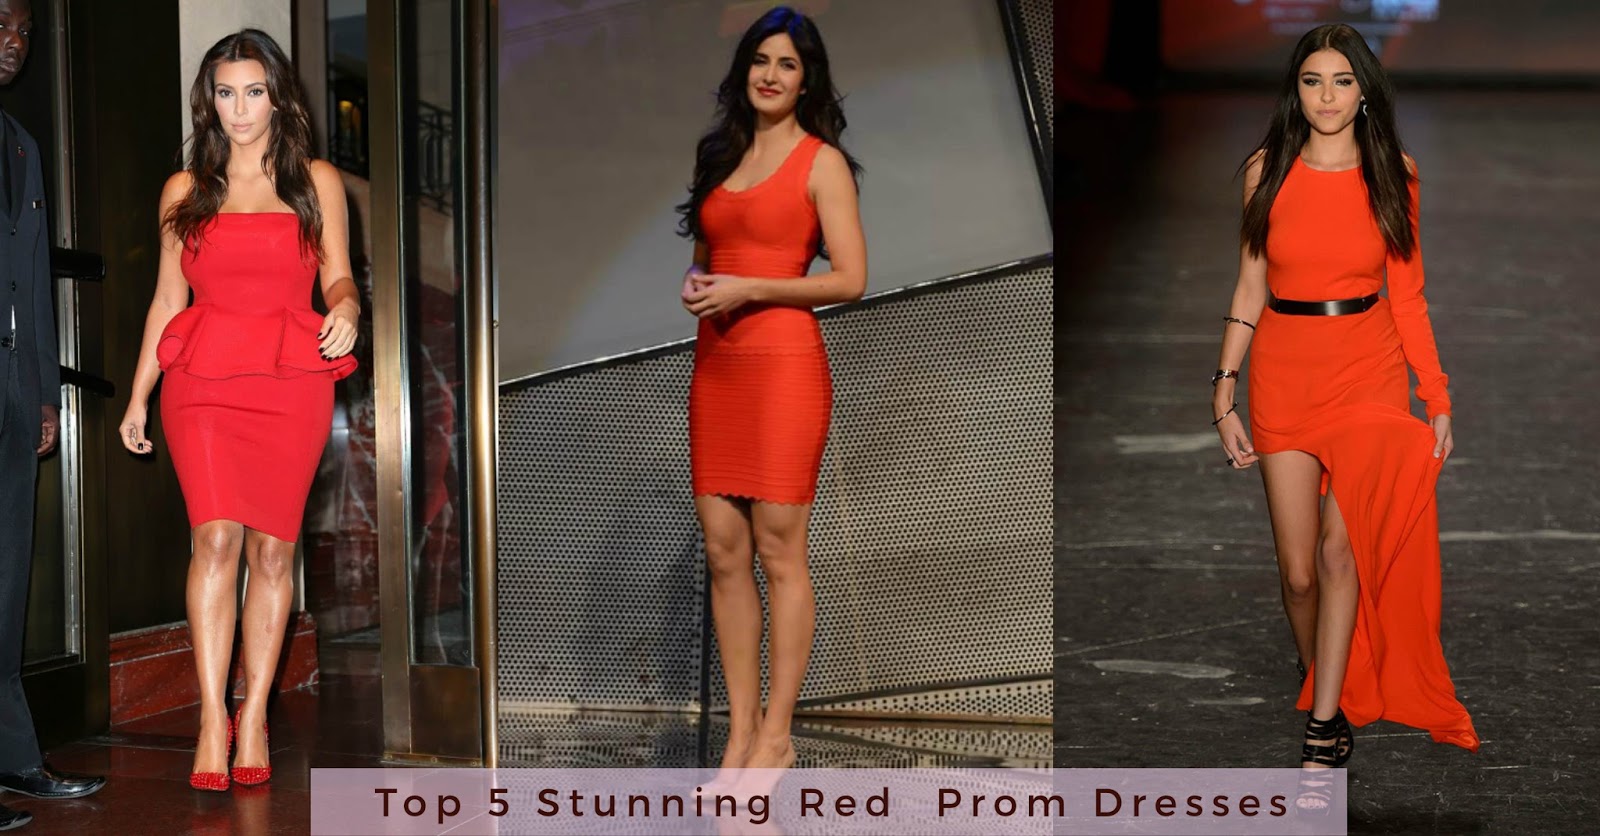 Top 5 Stunning Red Prom Dresses